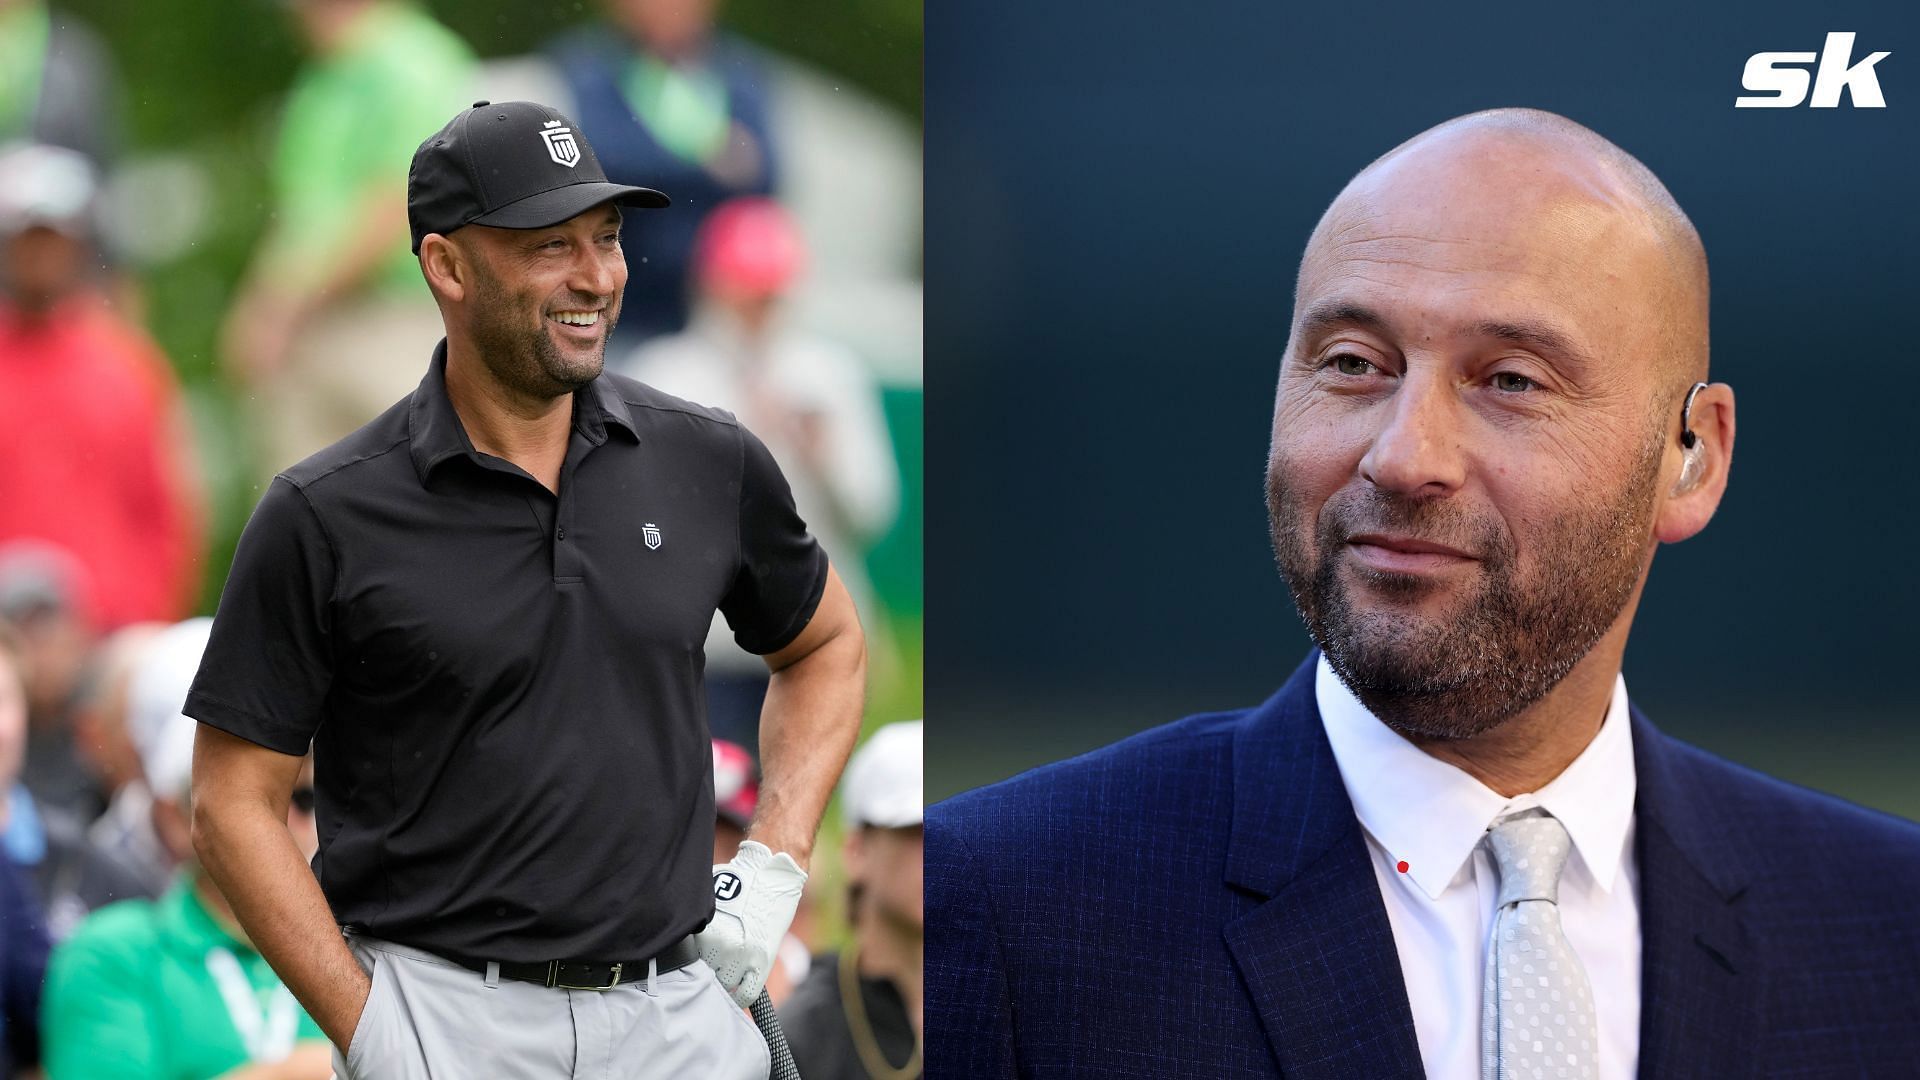 Derek Jeter is gearing up for a Christmas to be spent with family and friends